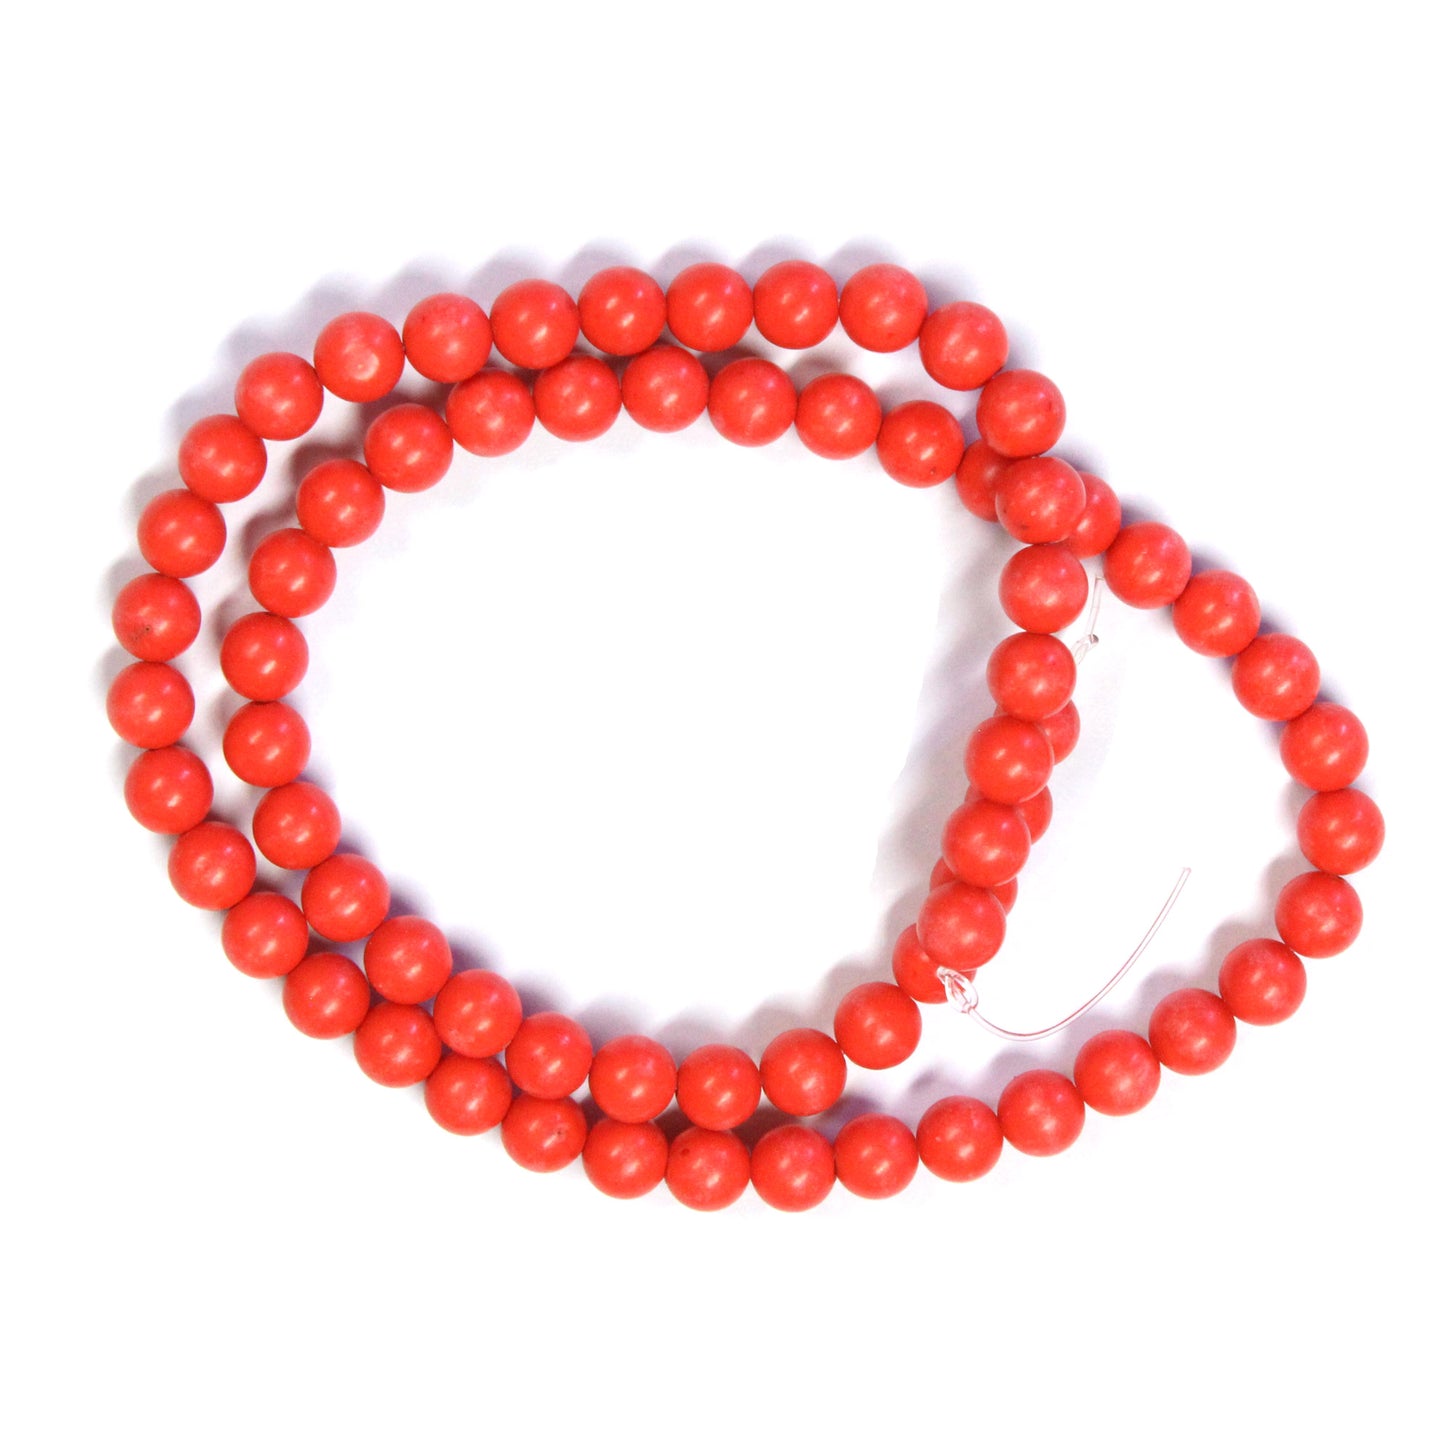 RED CORAL 6mm Round Beads / 16 Inch strand / man-made permanently dyed coral beads